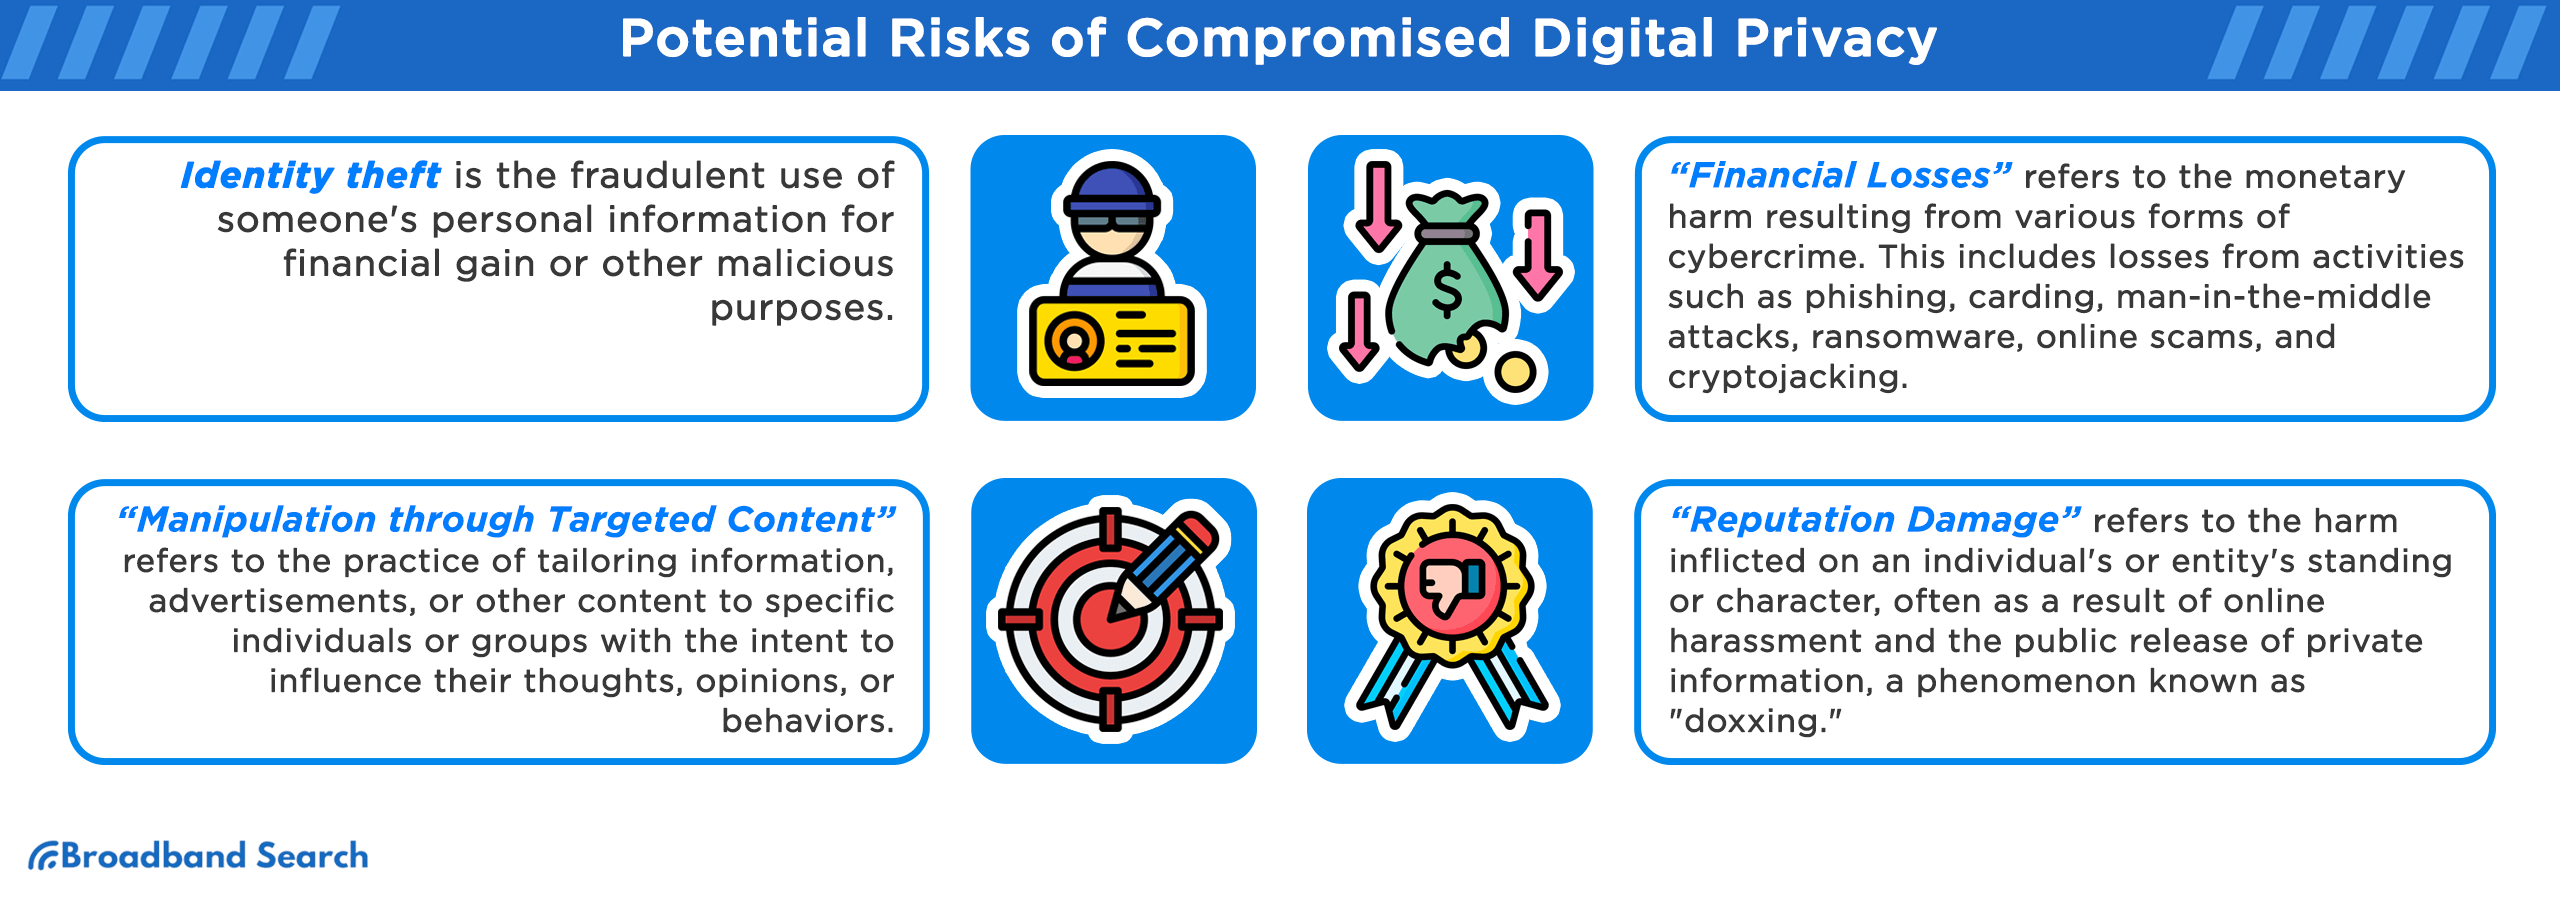 four potential risks of compromised digital privacy